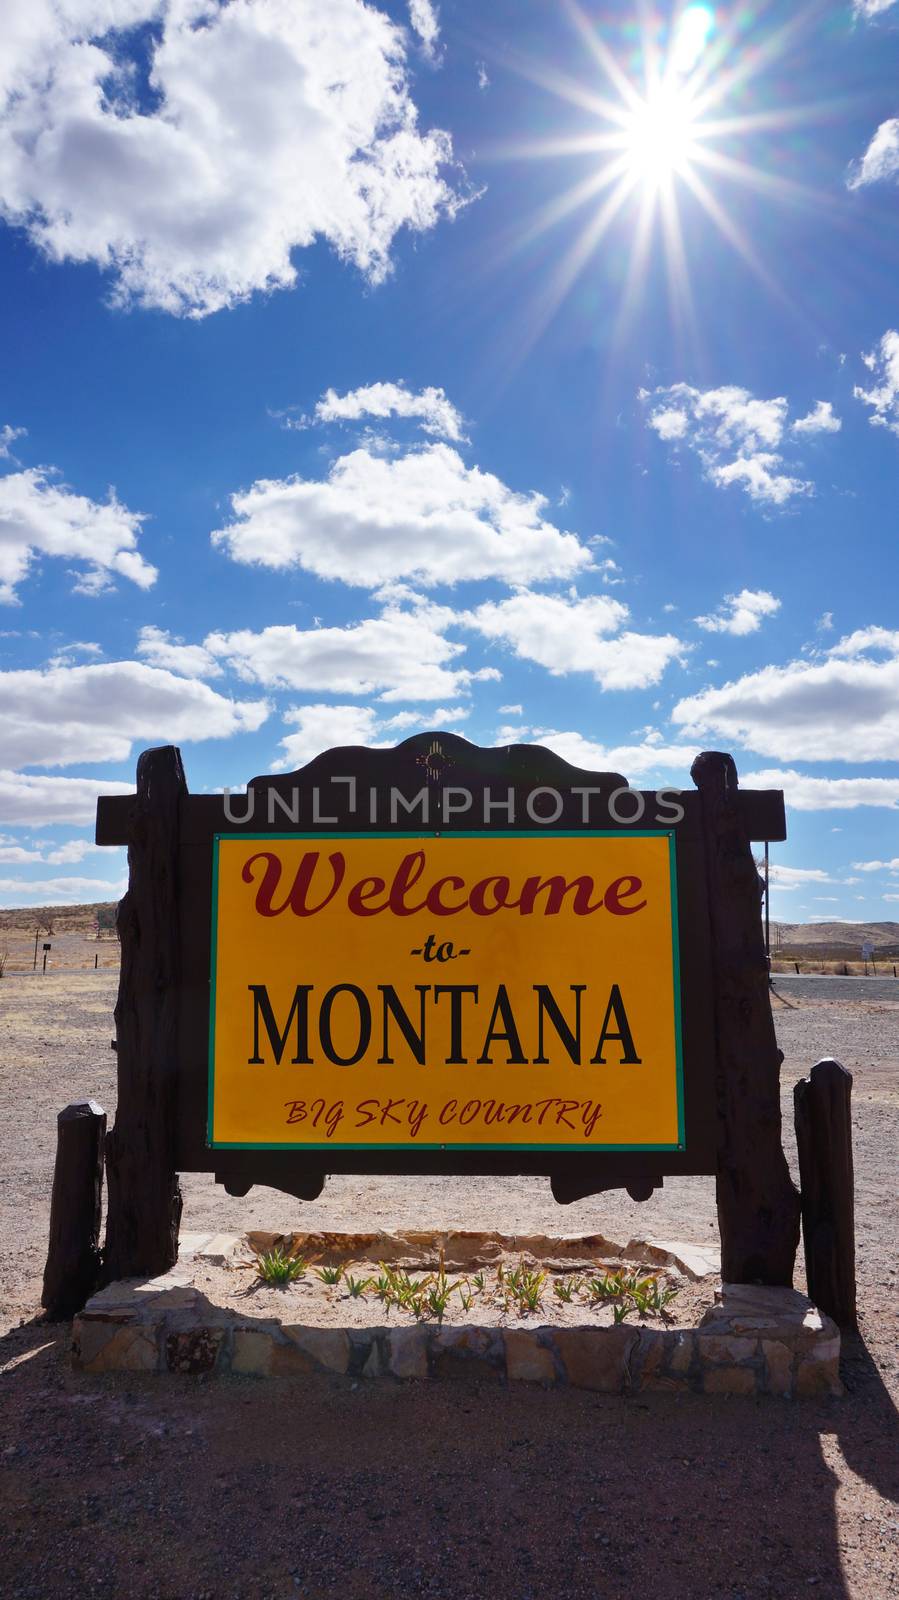 Welcome to Montana road sign by tang90246